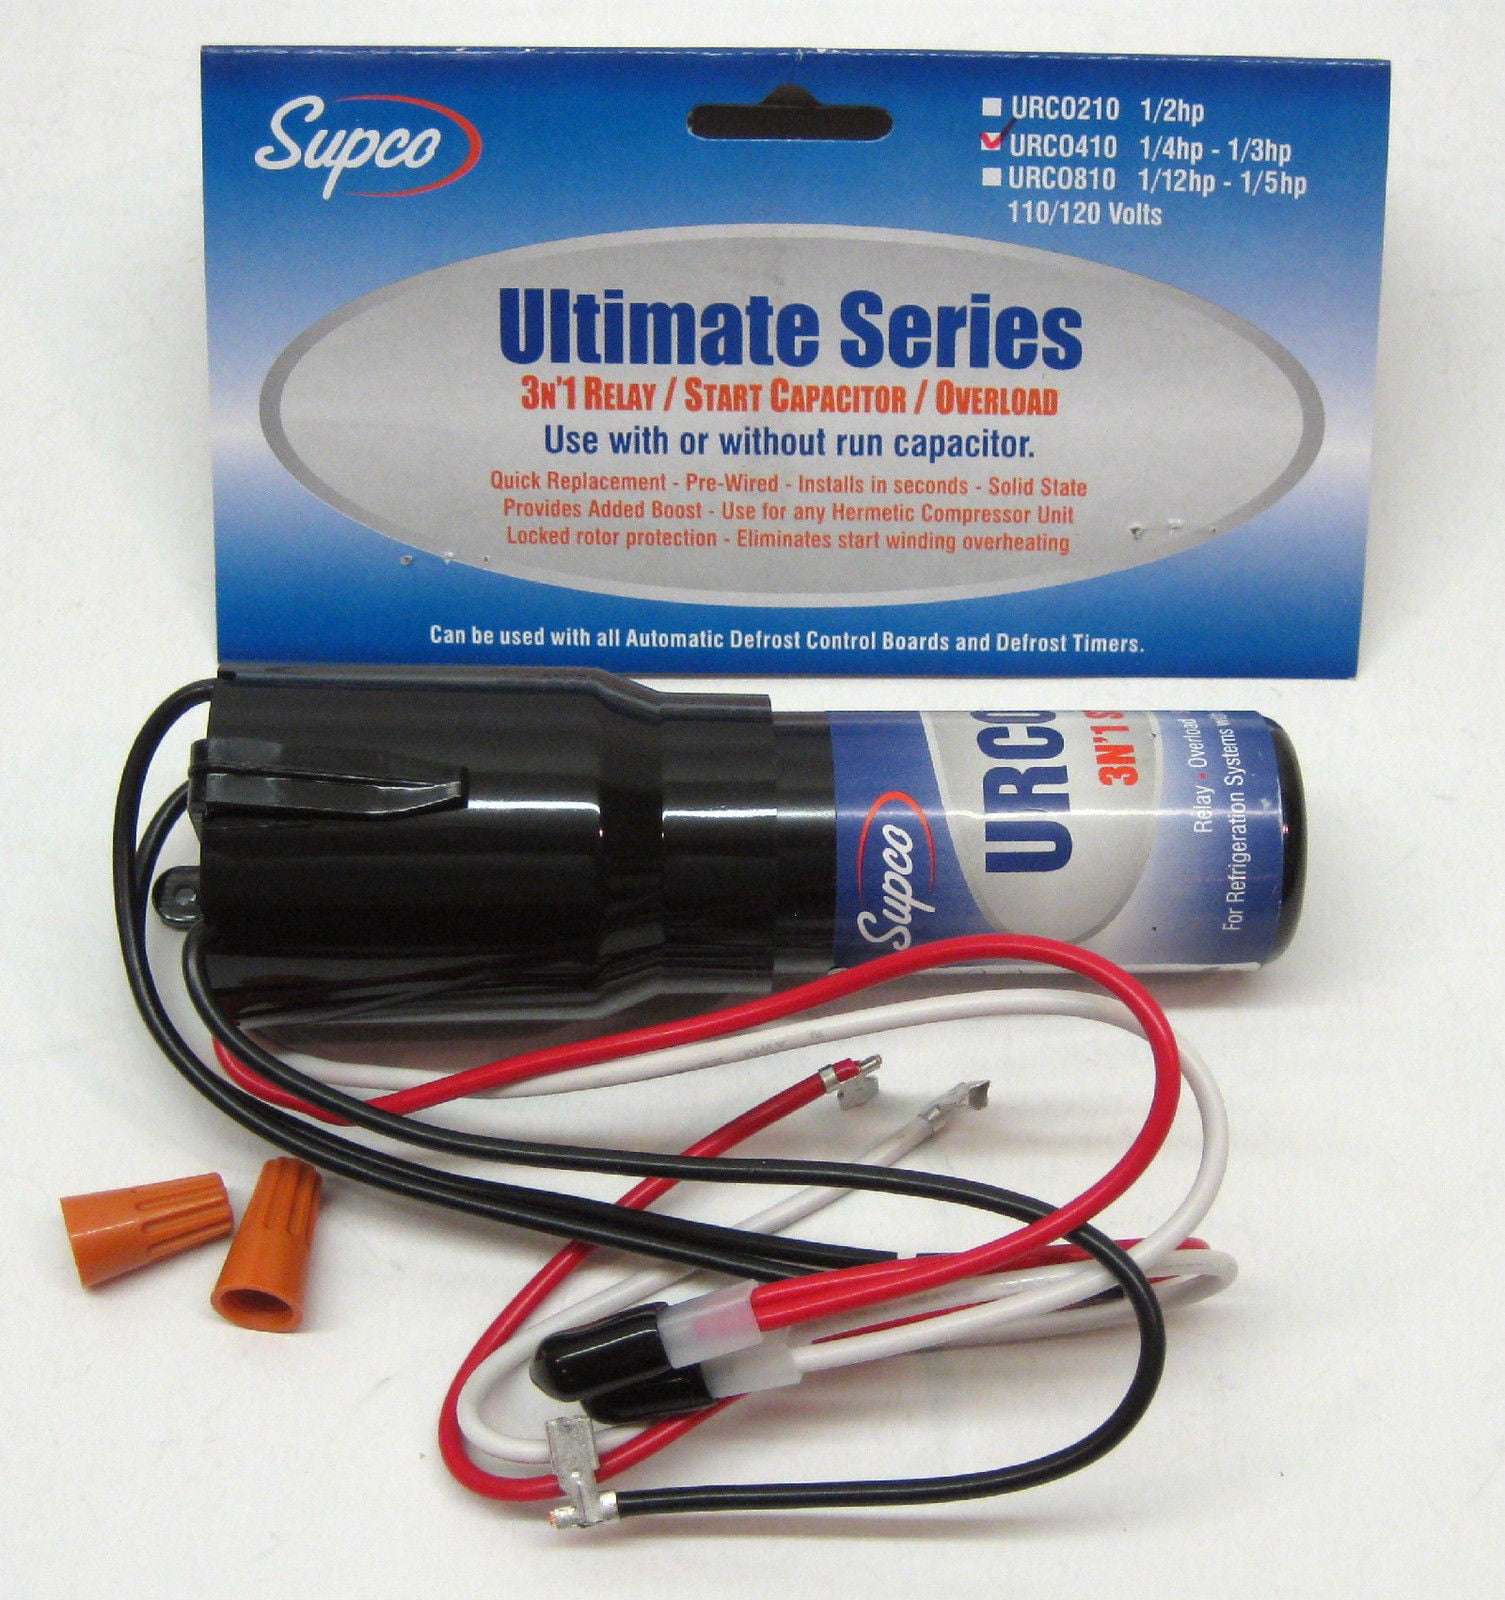 923045-4 Supco Hard Start Kit, Relay, Overload and Start Capacitor, 115  Voltage, 1/4 to 1/3 HP